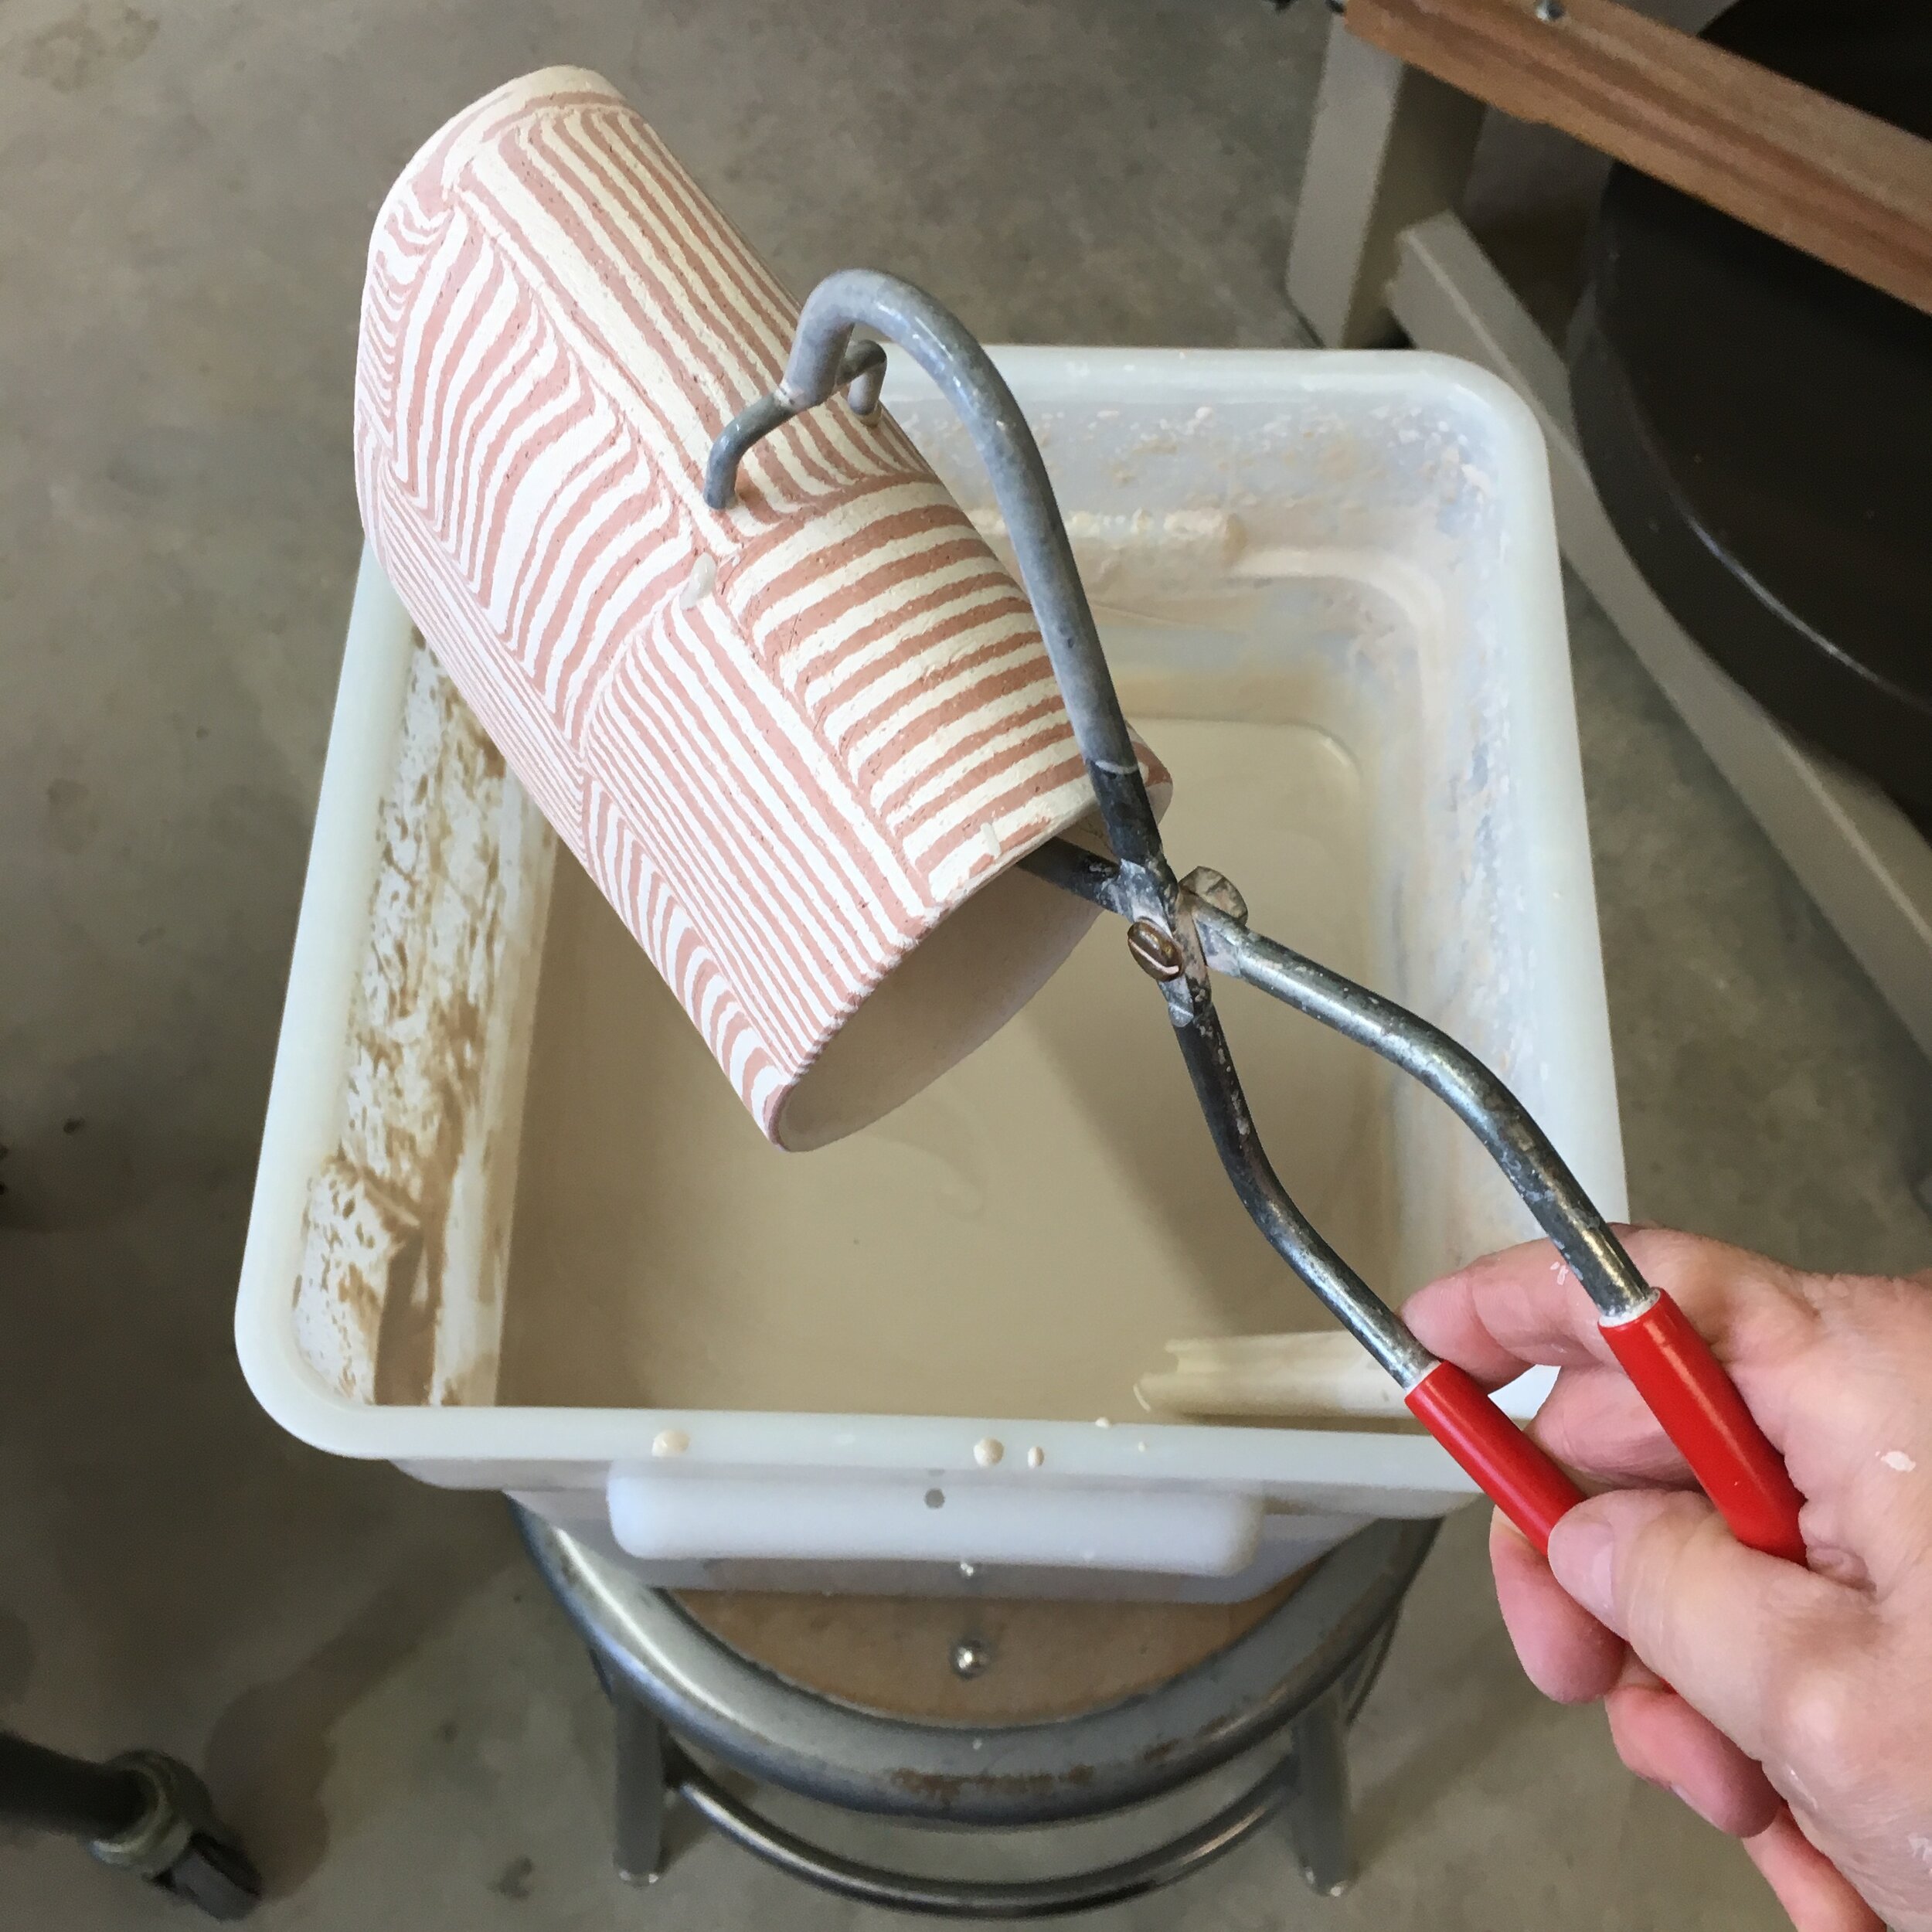 Pot being lowered into the dipping glaze.